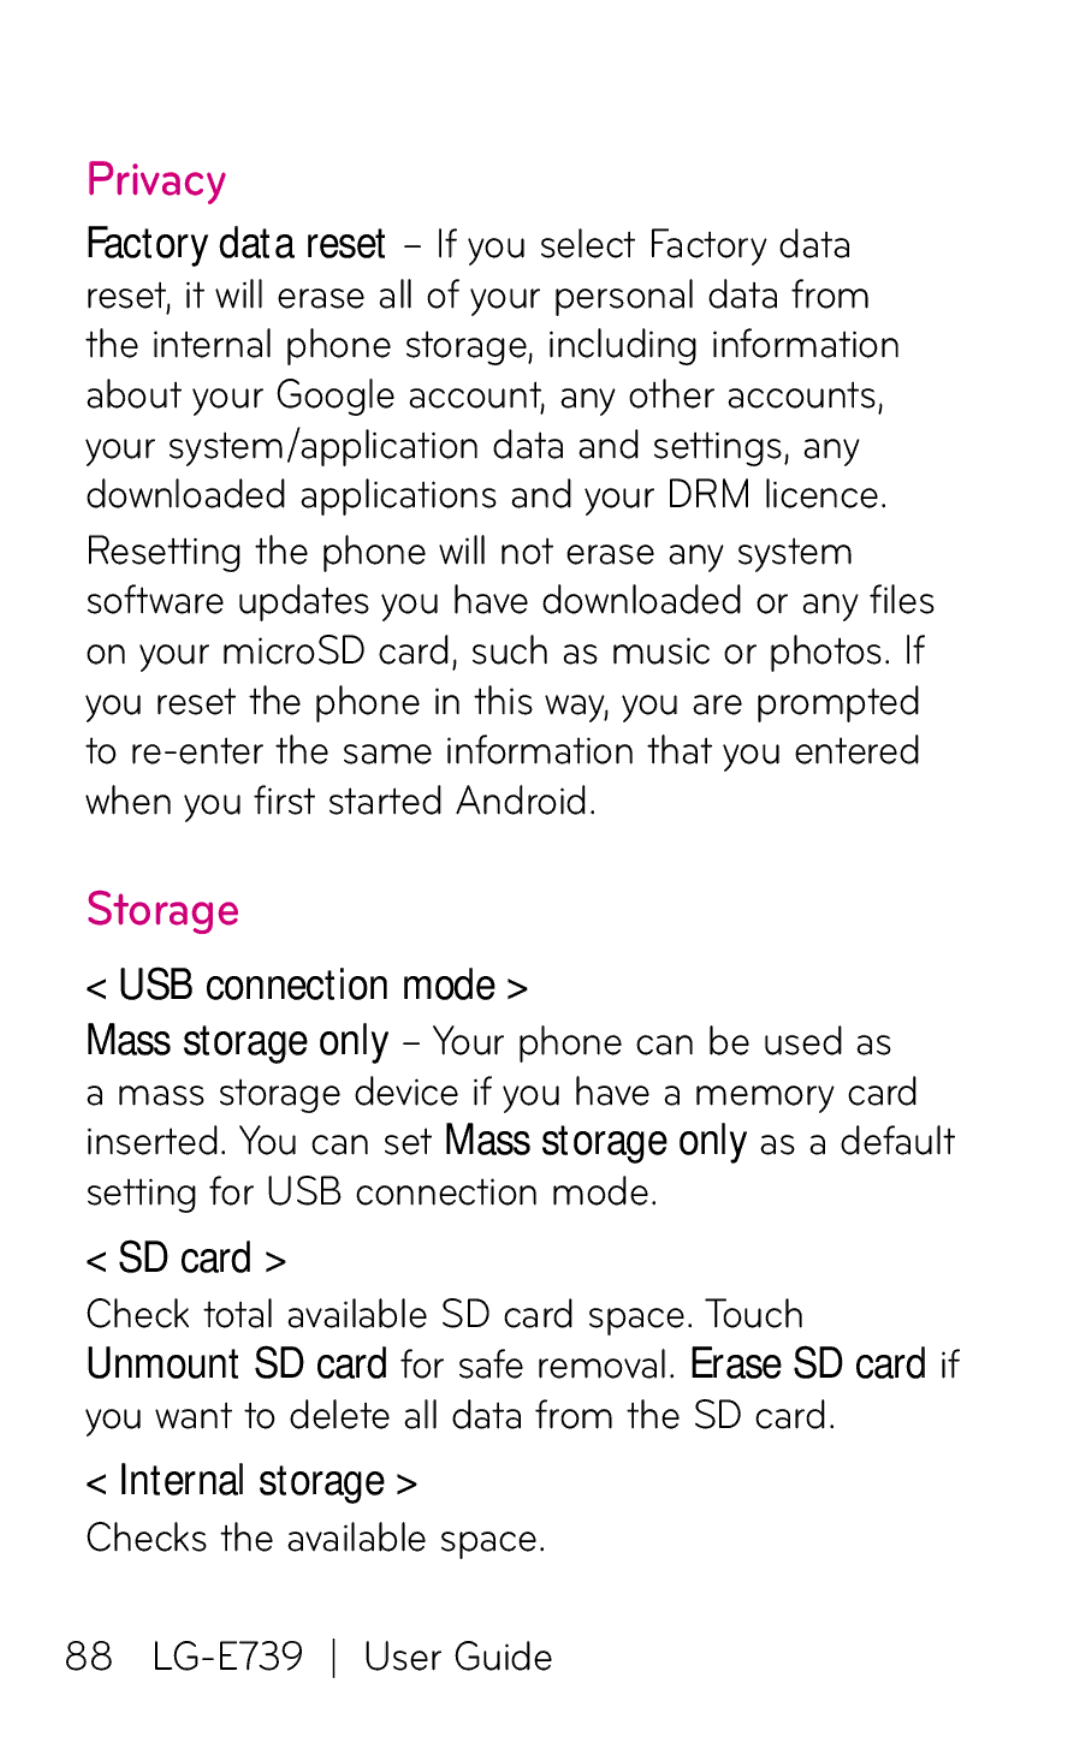 LG Electronics E739 manual Privacy, Storage, USB connection mode, SD card 